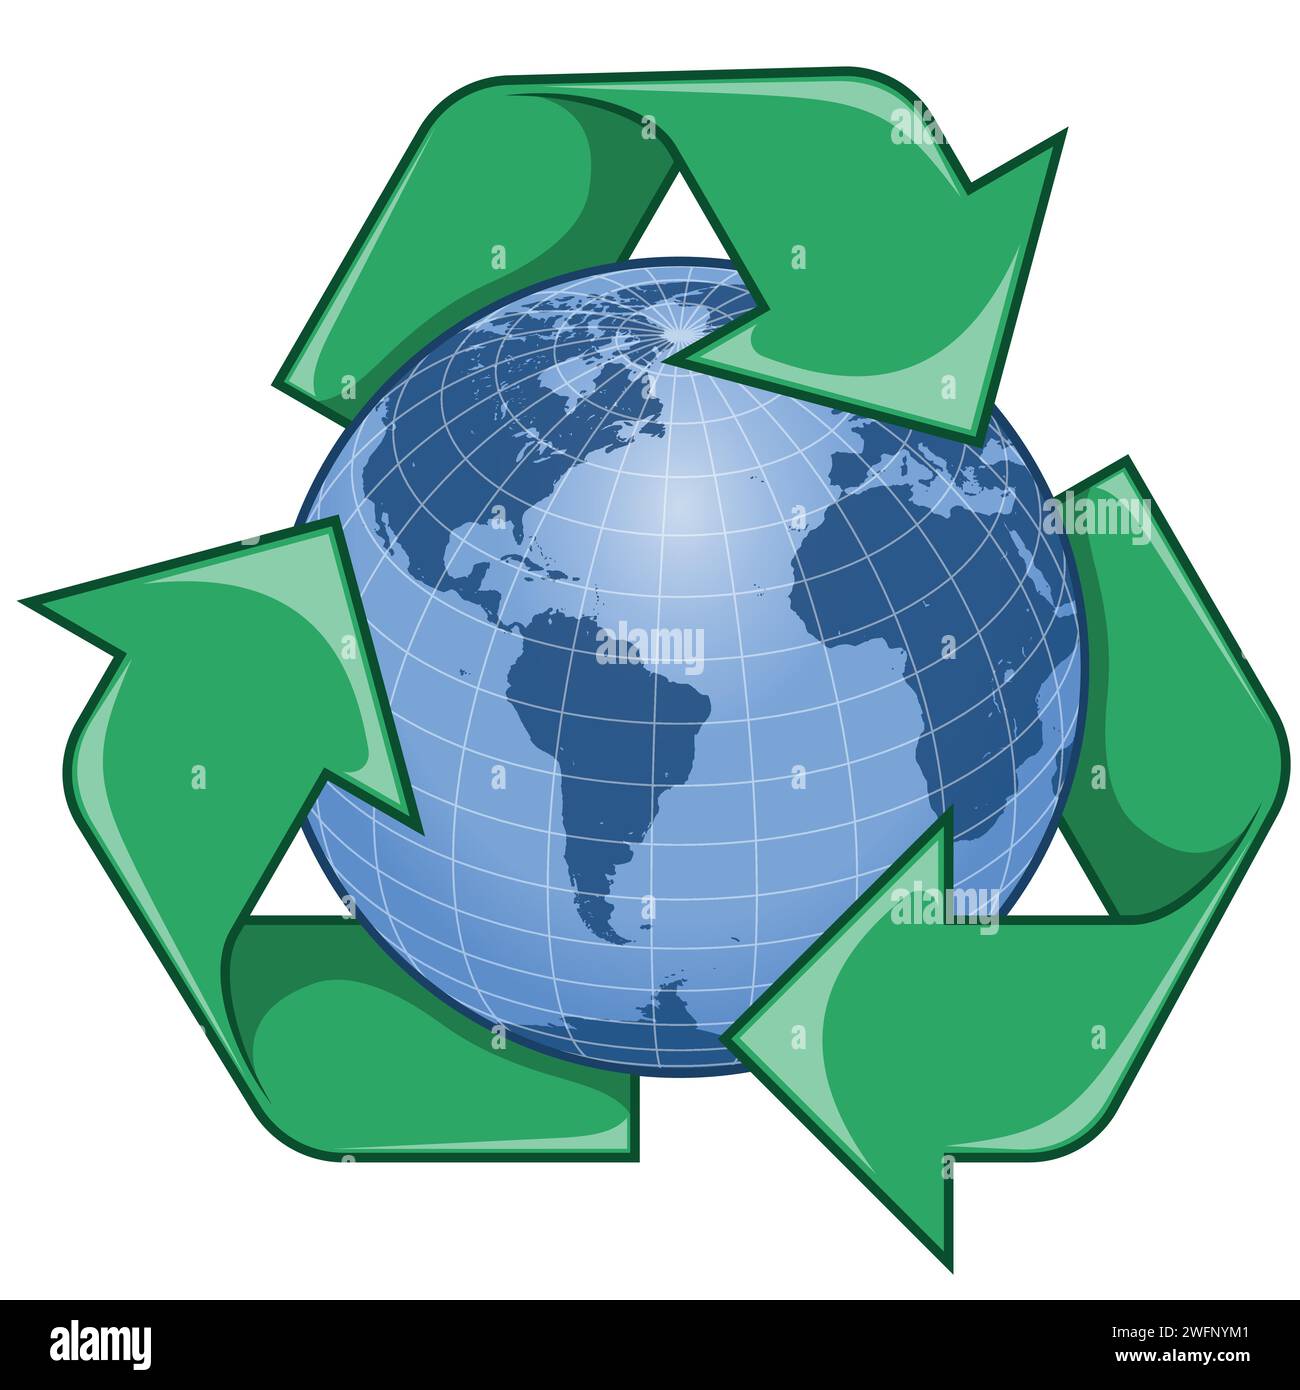 Recycling logo vector design with Planet Earth, earth sphere design with recycling arrows Stock Vector